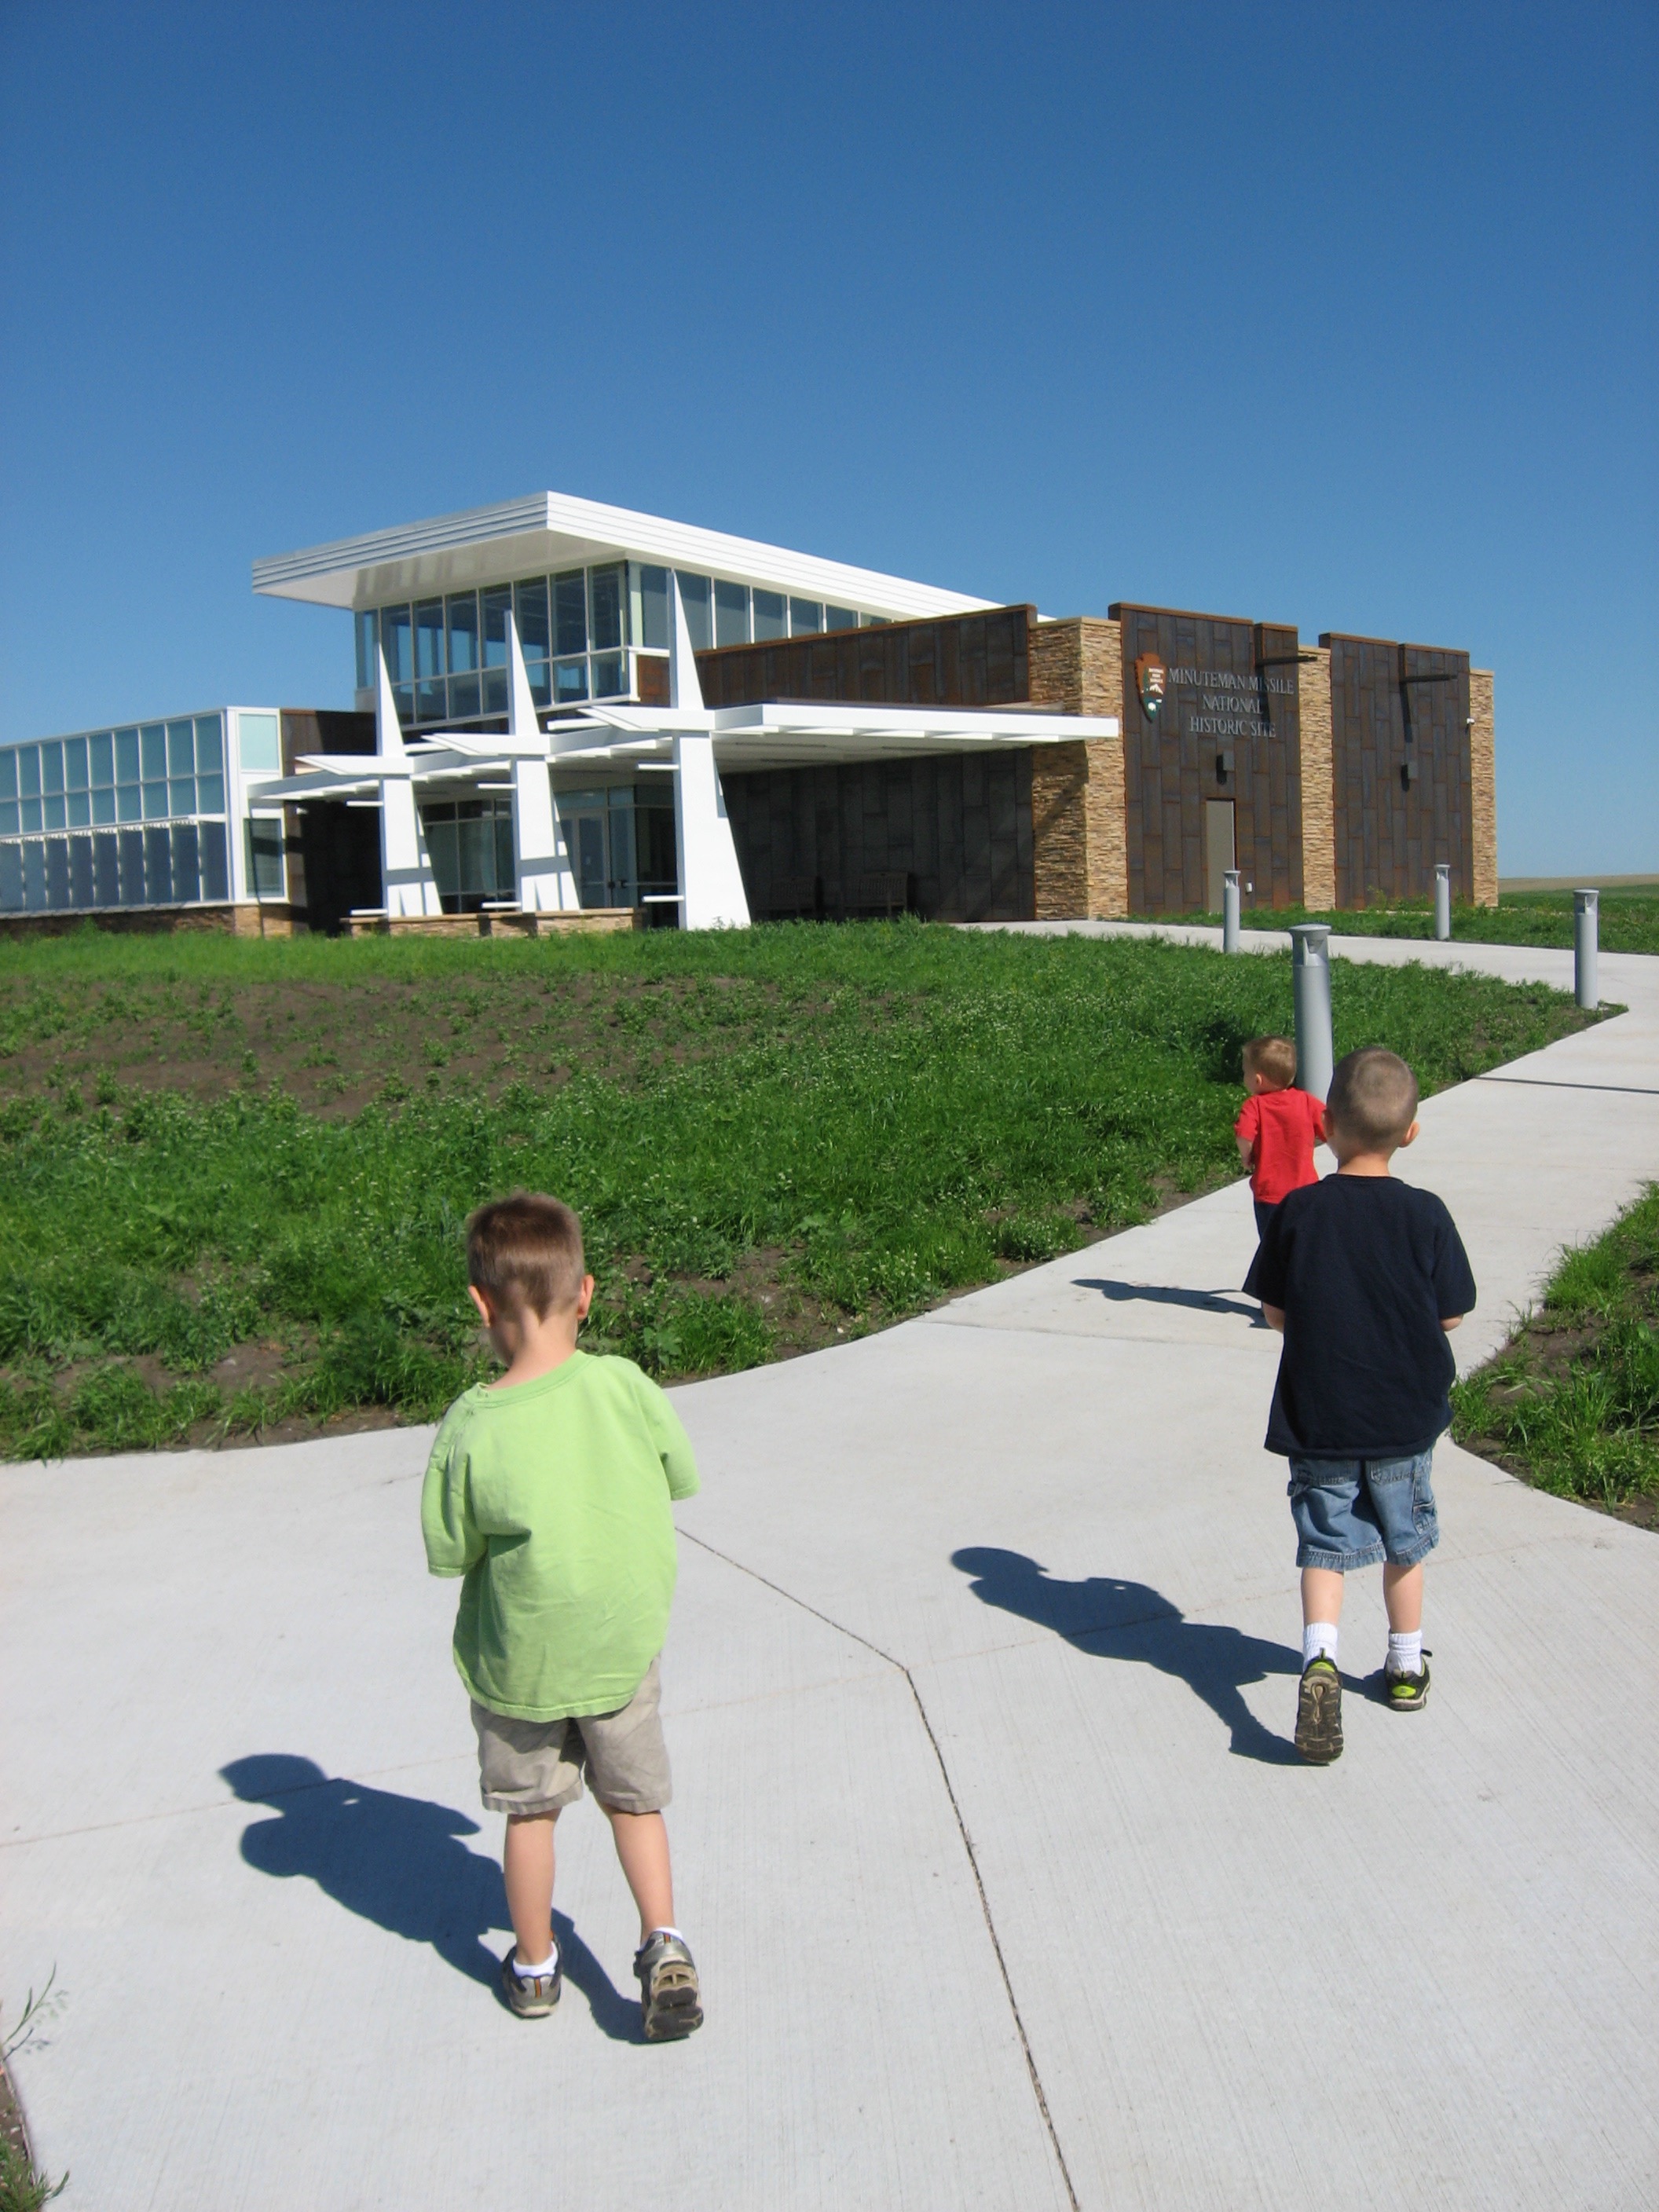 Racing to the Minuteman Missile Visitor Center